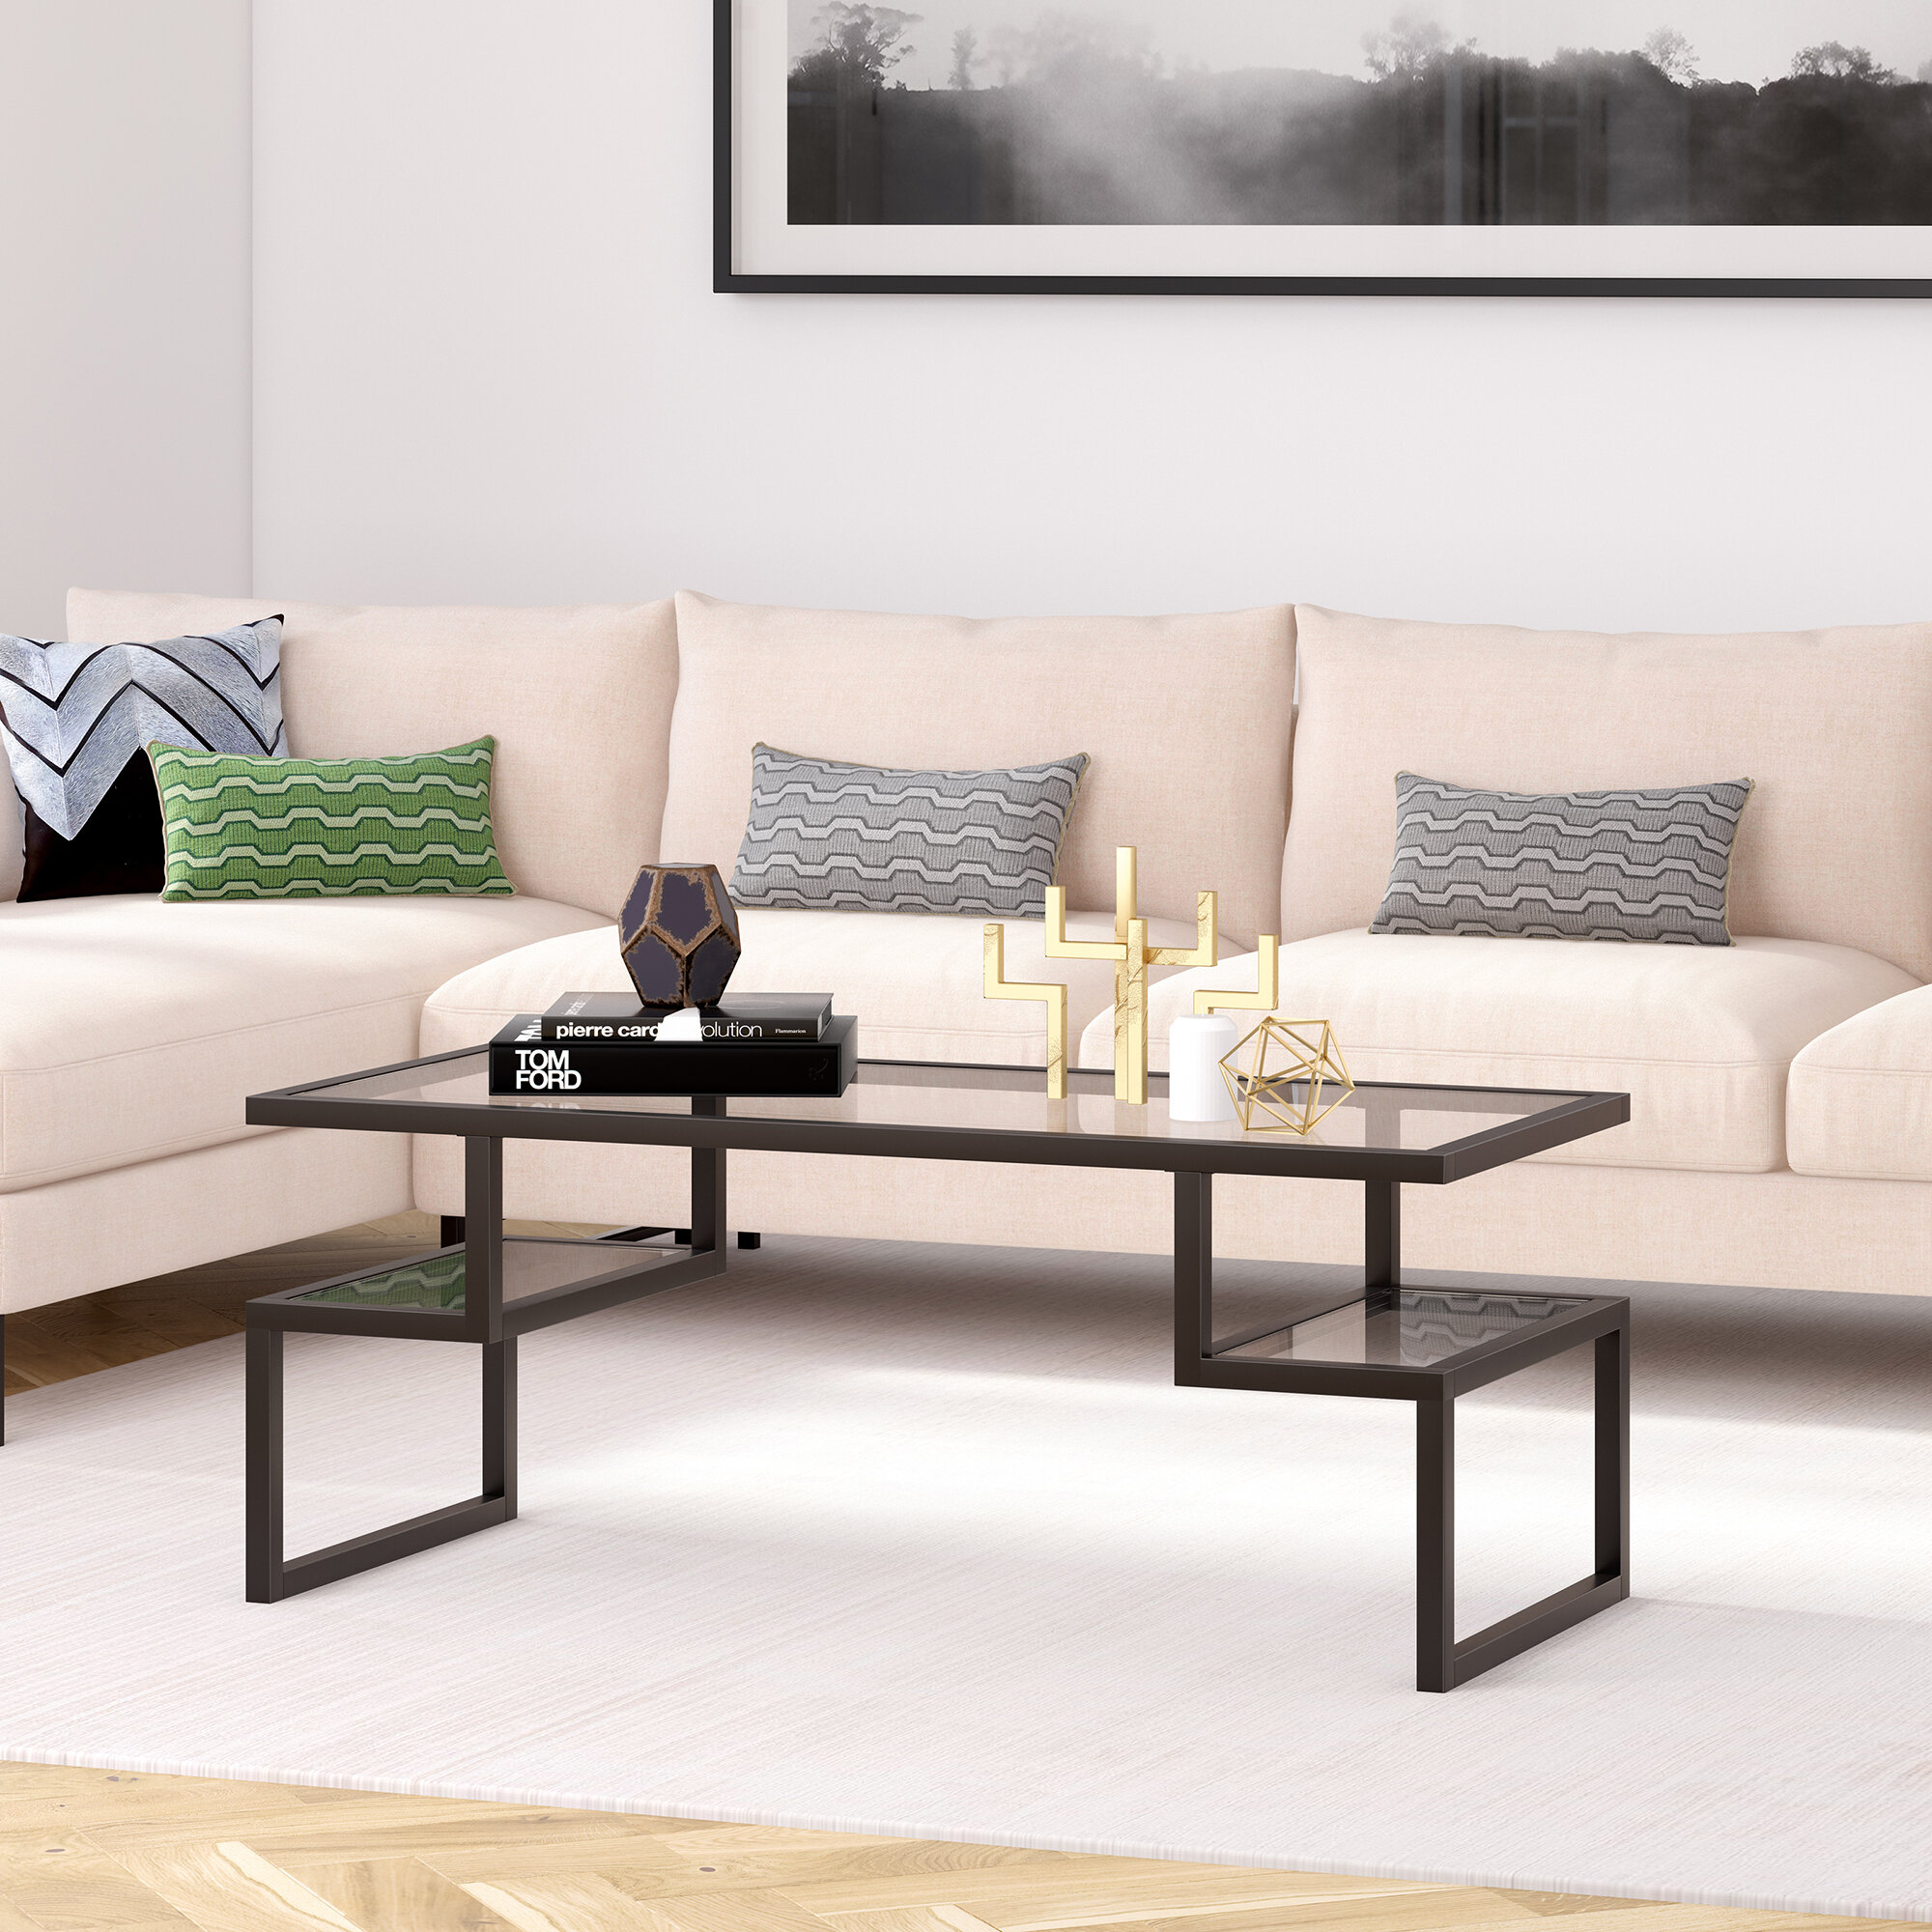 Featured image of post Contemporary Black Glass Coffee Table / The best way to tie your room together is with a stylish coffee table.